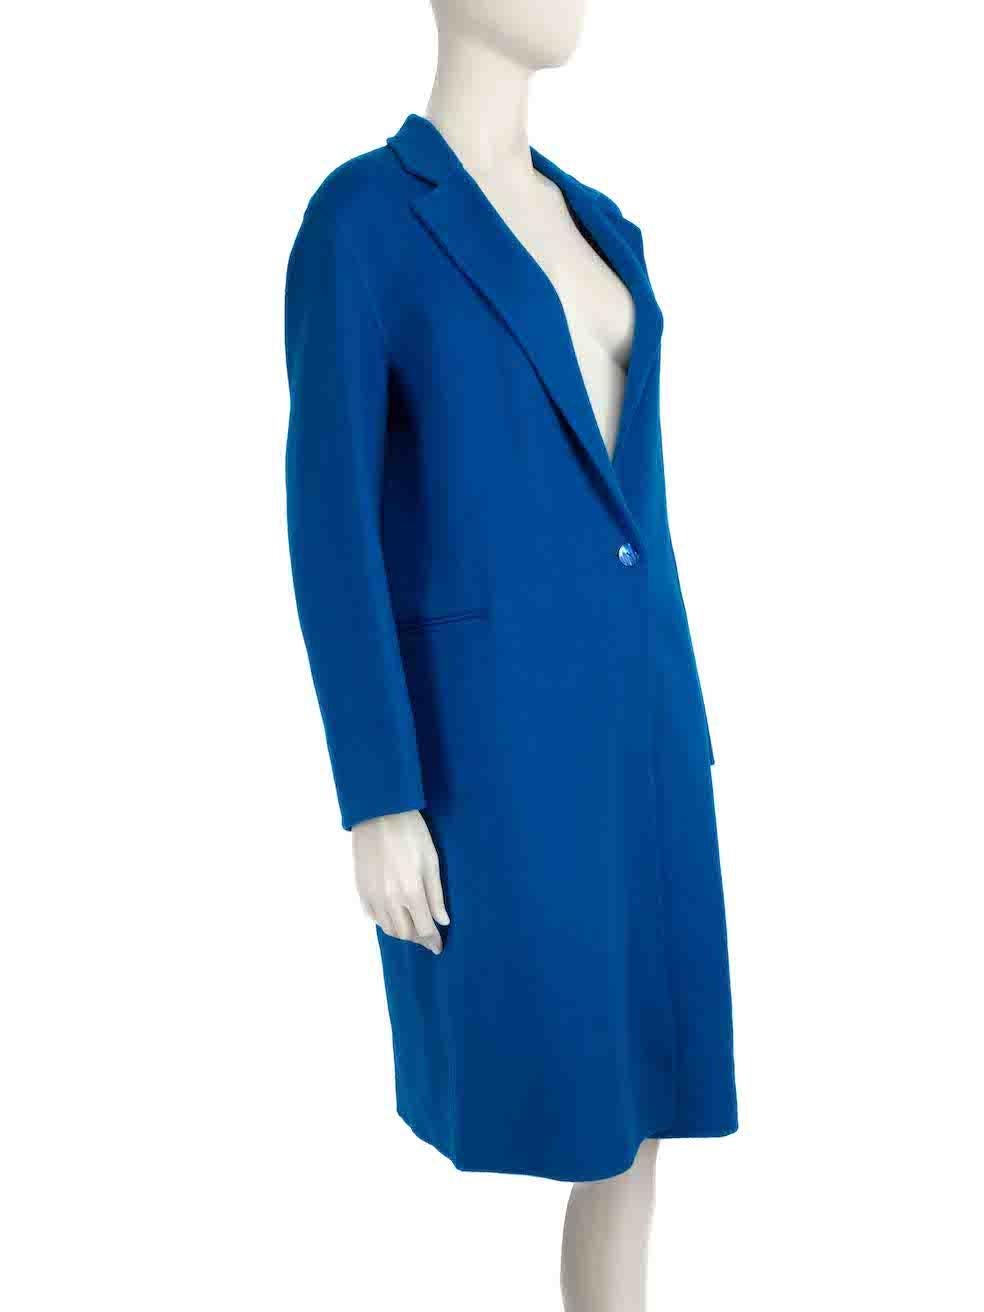 CONDITION is Very good. Minimal wear to coat is evident. Minimal wear to the brand label at the back of the neck which has come partially unstitched on this used Sandro designer resale item.
 
 
 
 Details
 
 
 Blue
 
 Wool
 
 Coat
 
 Single